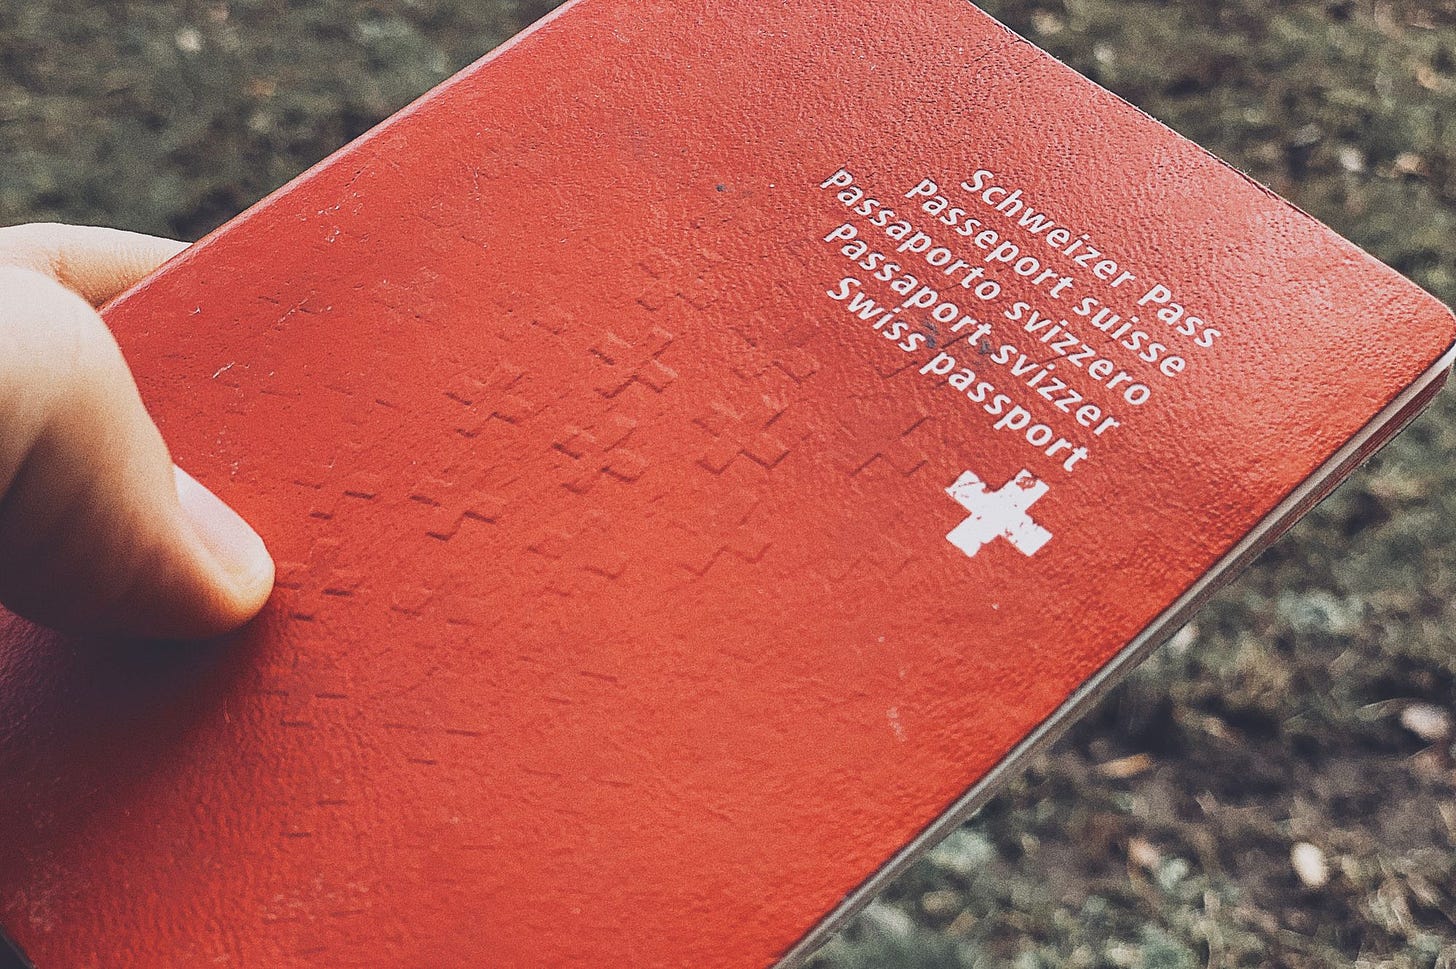 Becoming Swiss, part one: 'Before it begins'